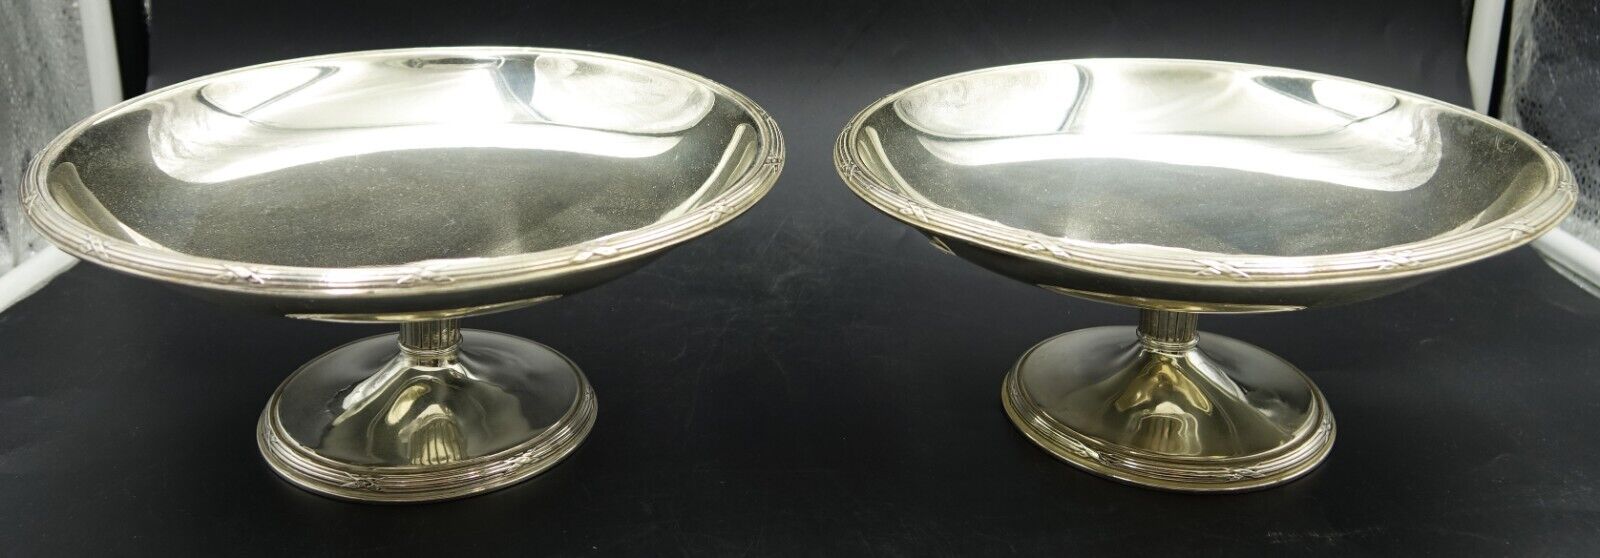 French Christofle Silverplate Rubans Rounded Footed Cake Stand Pair